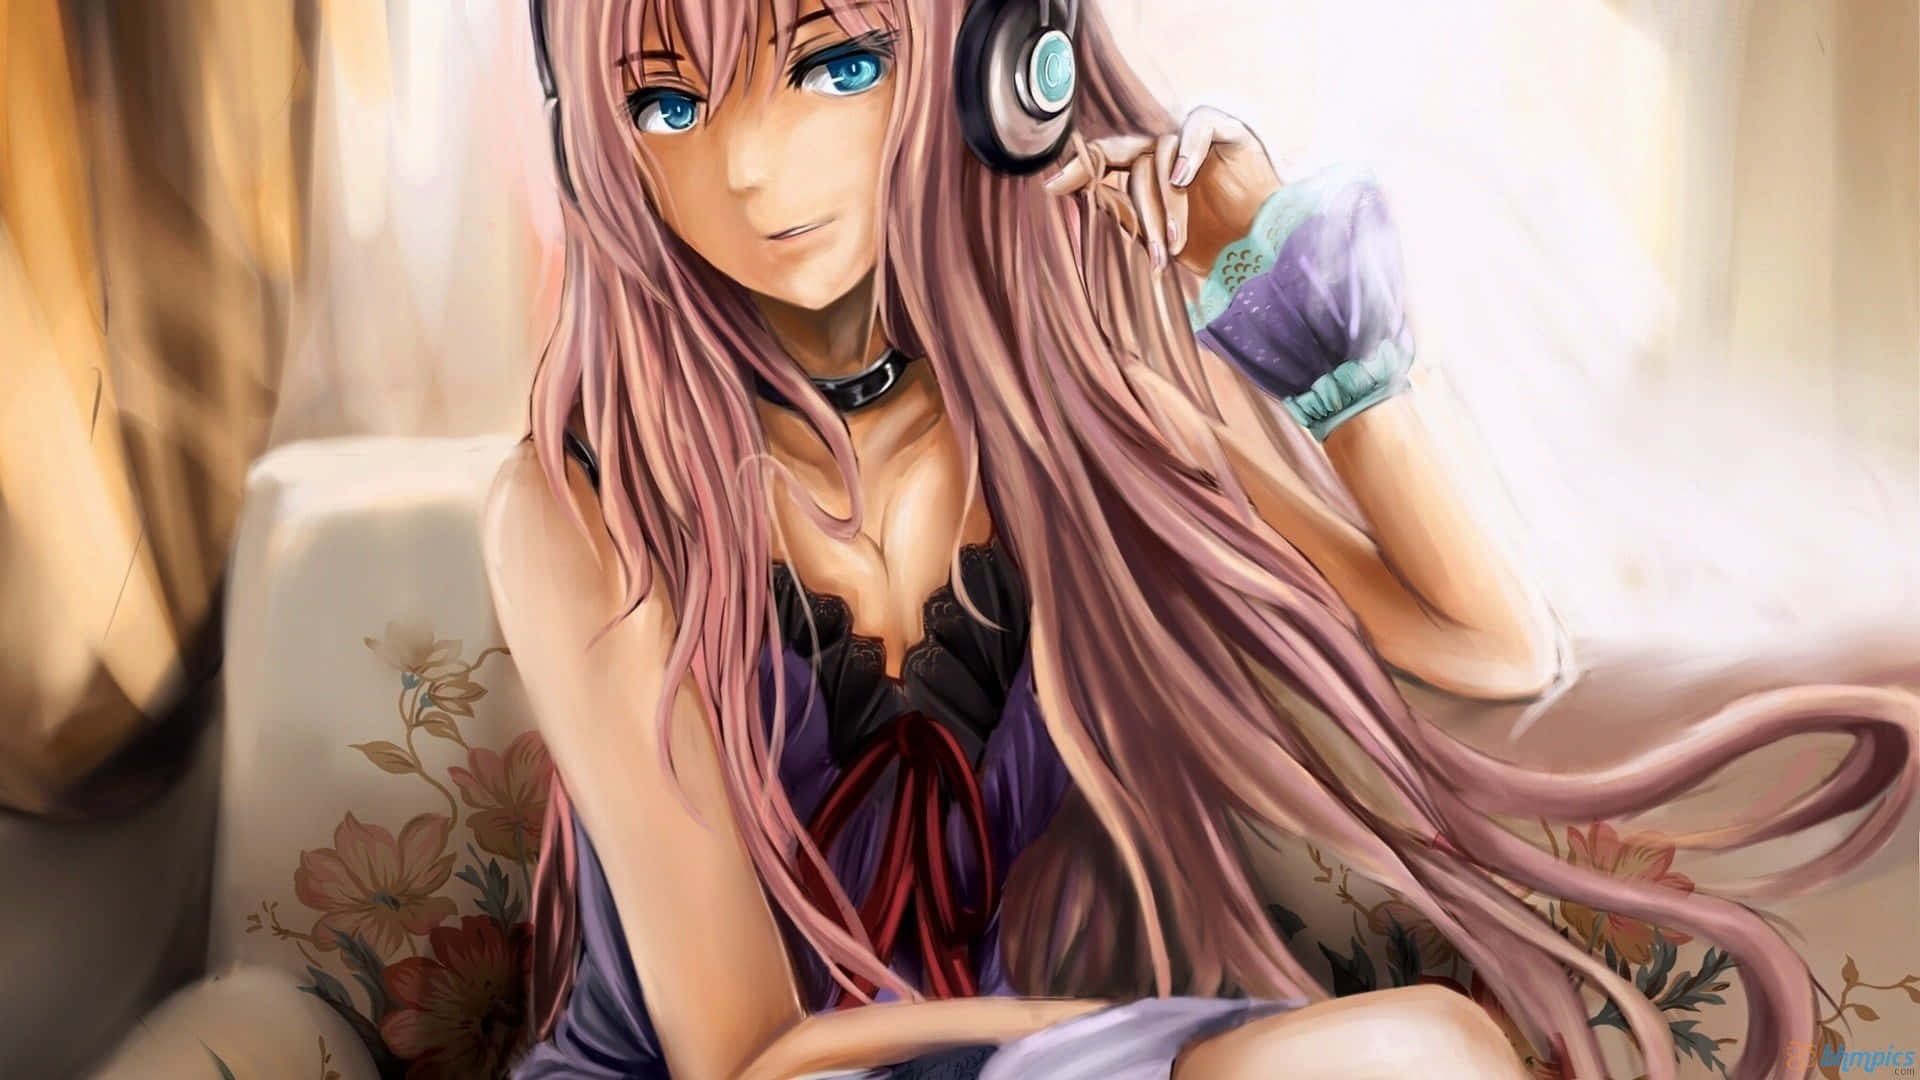 A Girl With Pink Hair And Headphones On Wallpaper